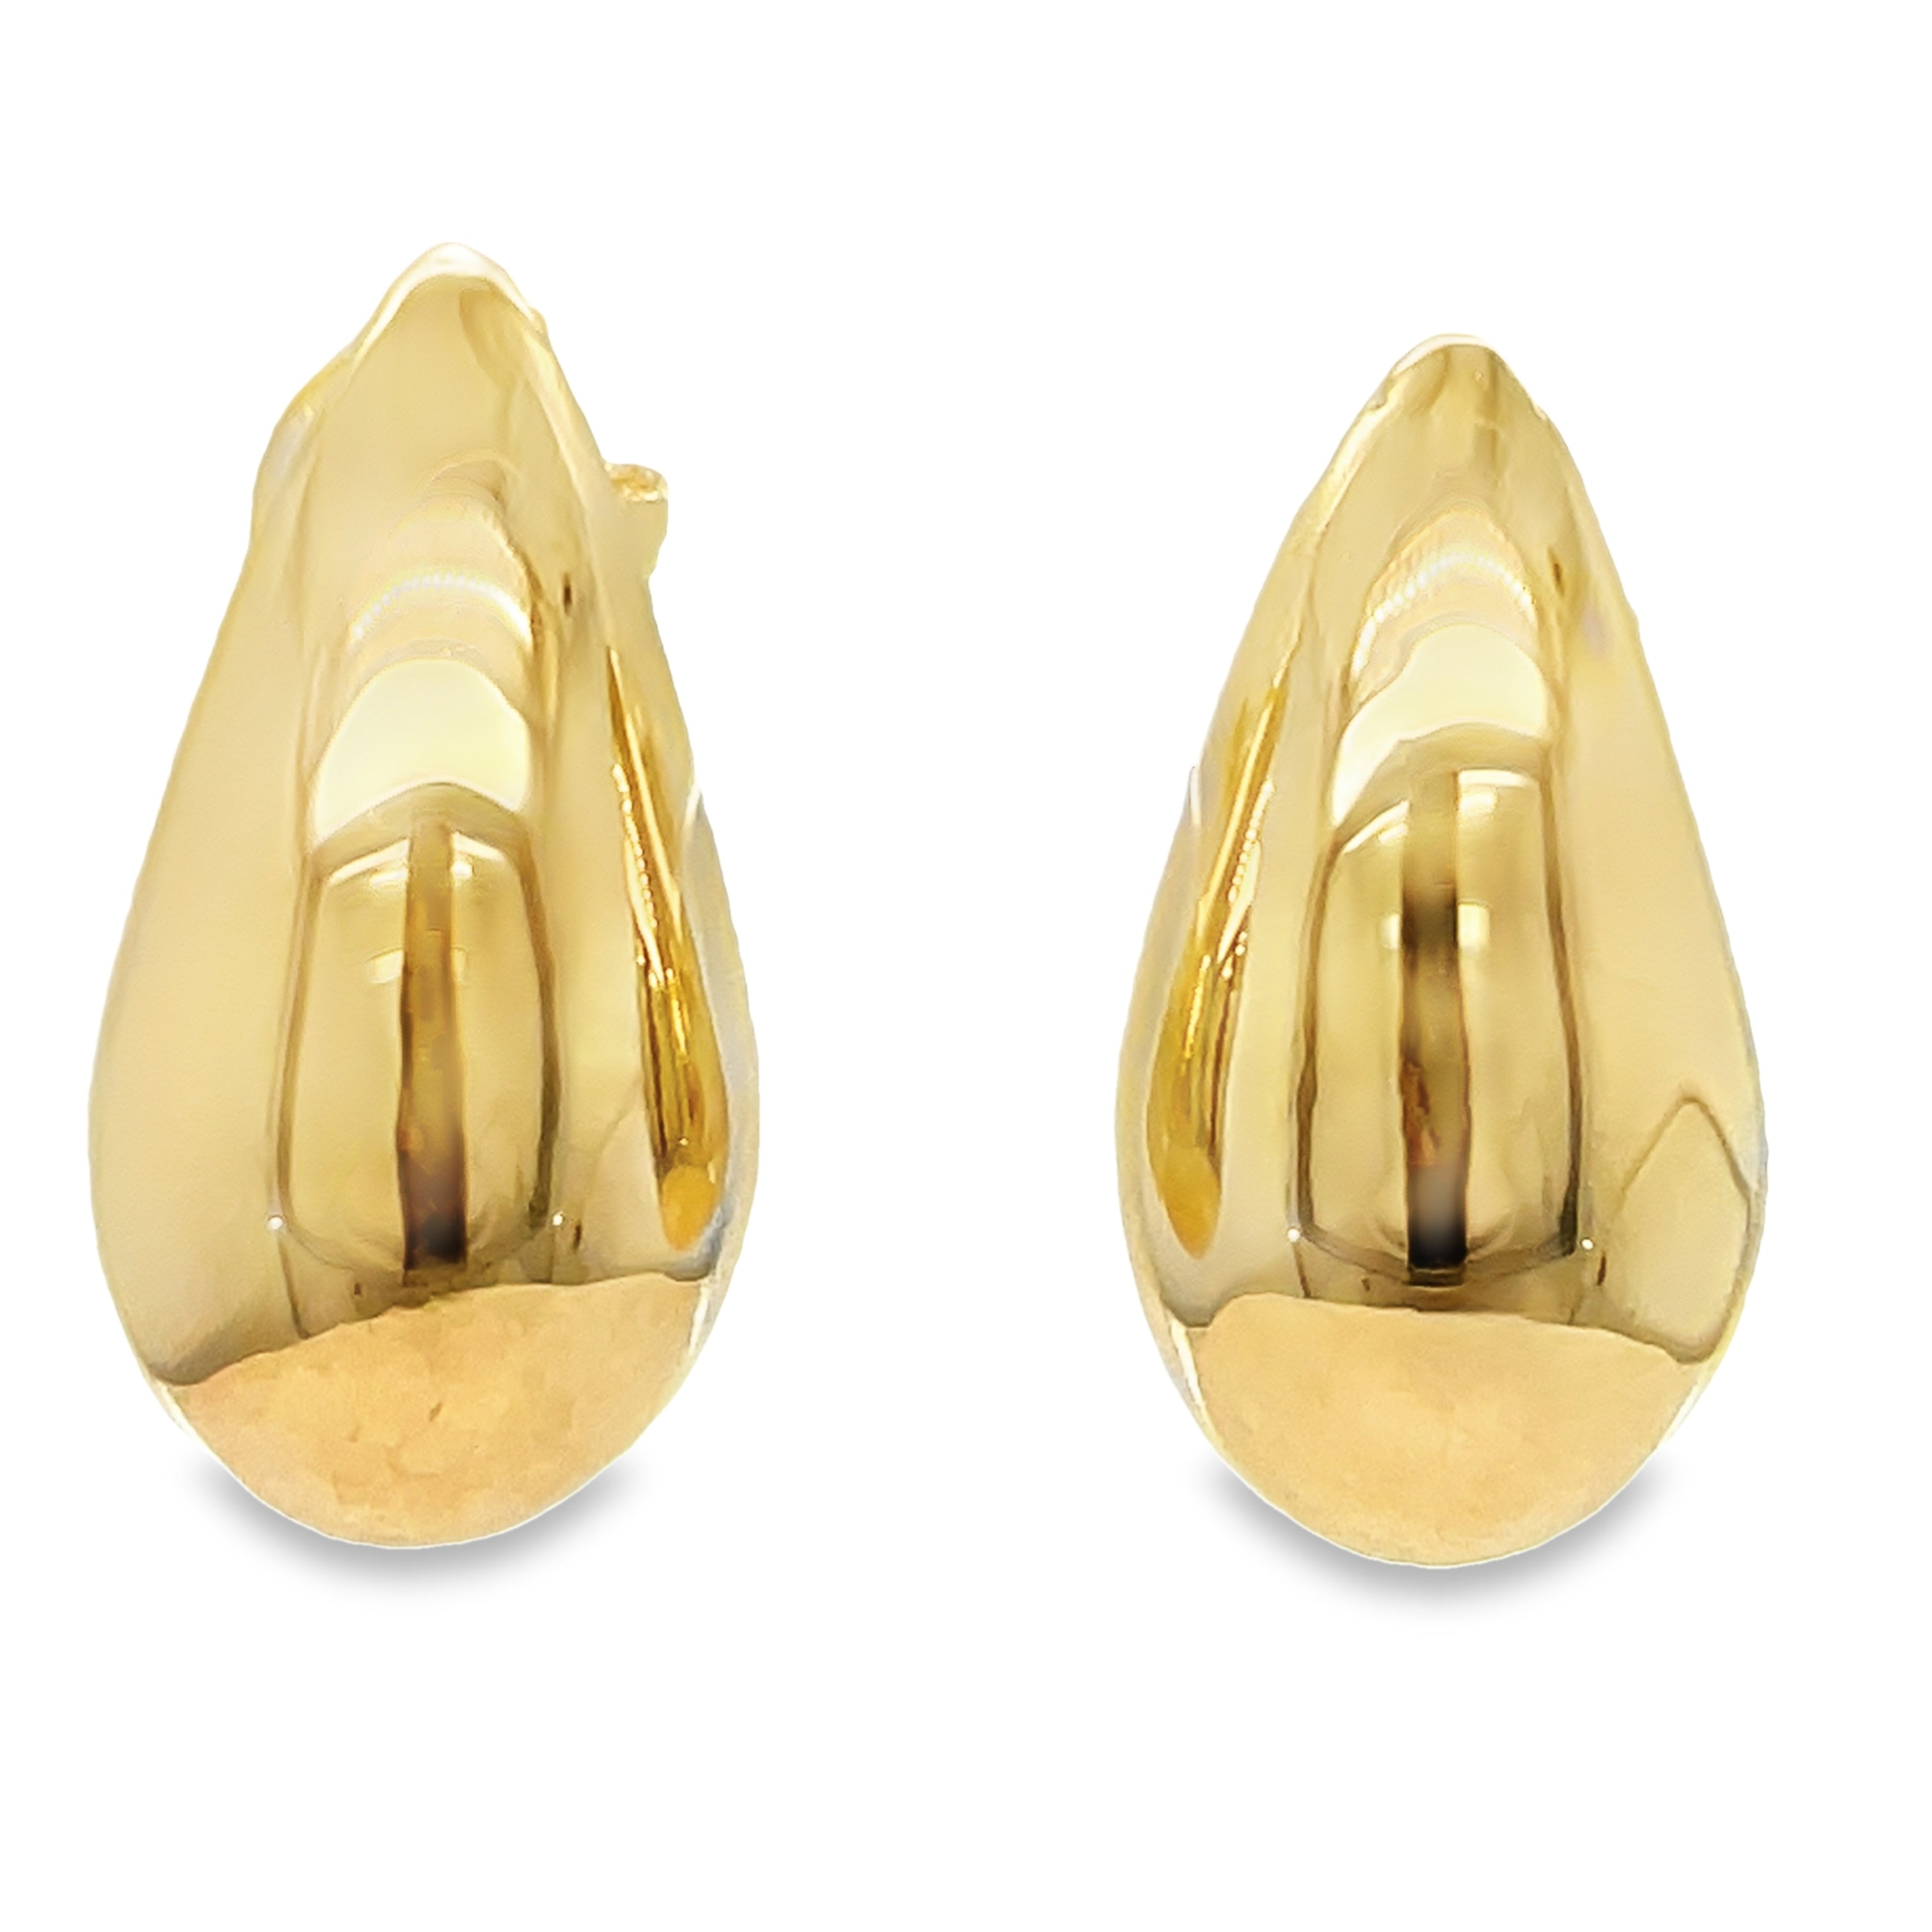 Complete any look with these beautiful 14k yellow gold tear-shape stud earrings. The classic tear shape is 22.00 mm in size, perfect for adding a spark of elegance to your outfit. Enjoy their subtle, timeless refinement while you make a lasting impression.